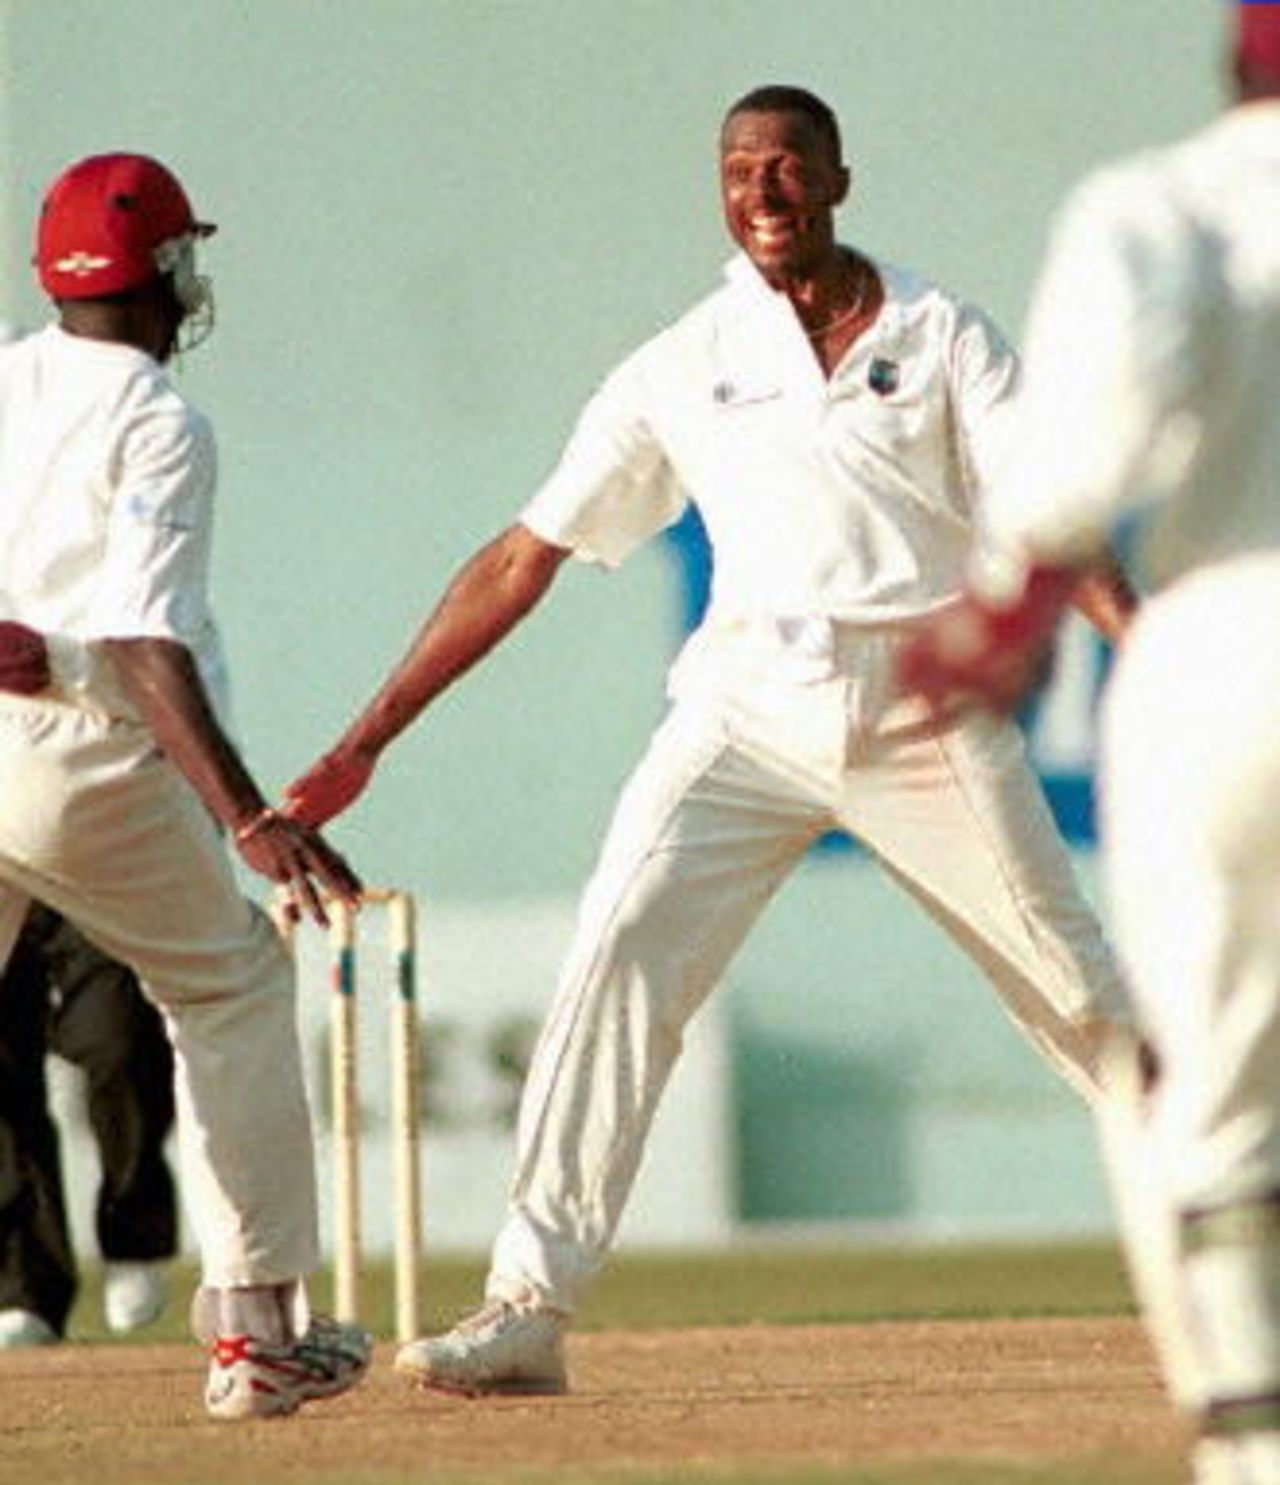 West Indies fast bowler Courtney Walsh (C) celebrates after taking his 435th wicket against Zimbabwe 27 March, 2000 in Kingston, Jamaica. Walsh broke the record held by India's Kapil Dev for most number of wickets